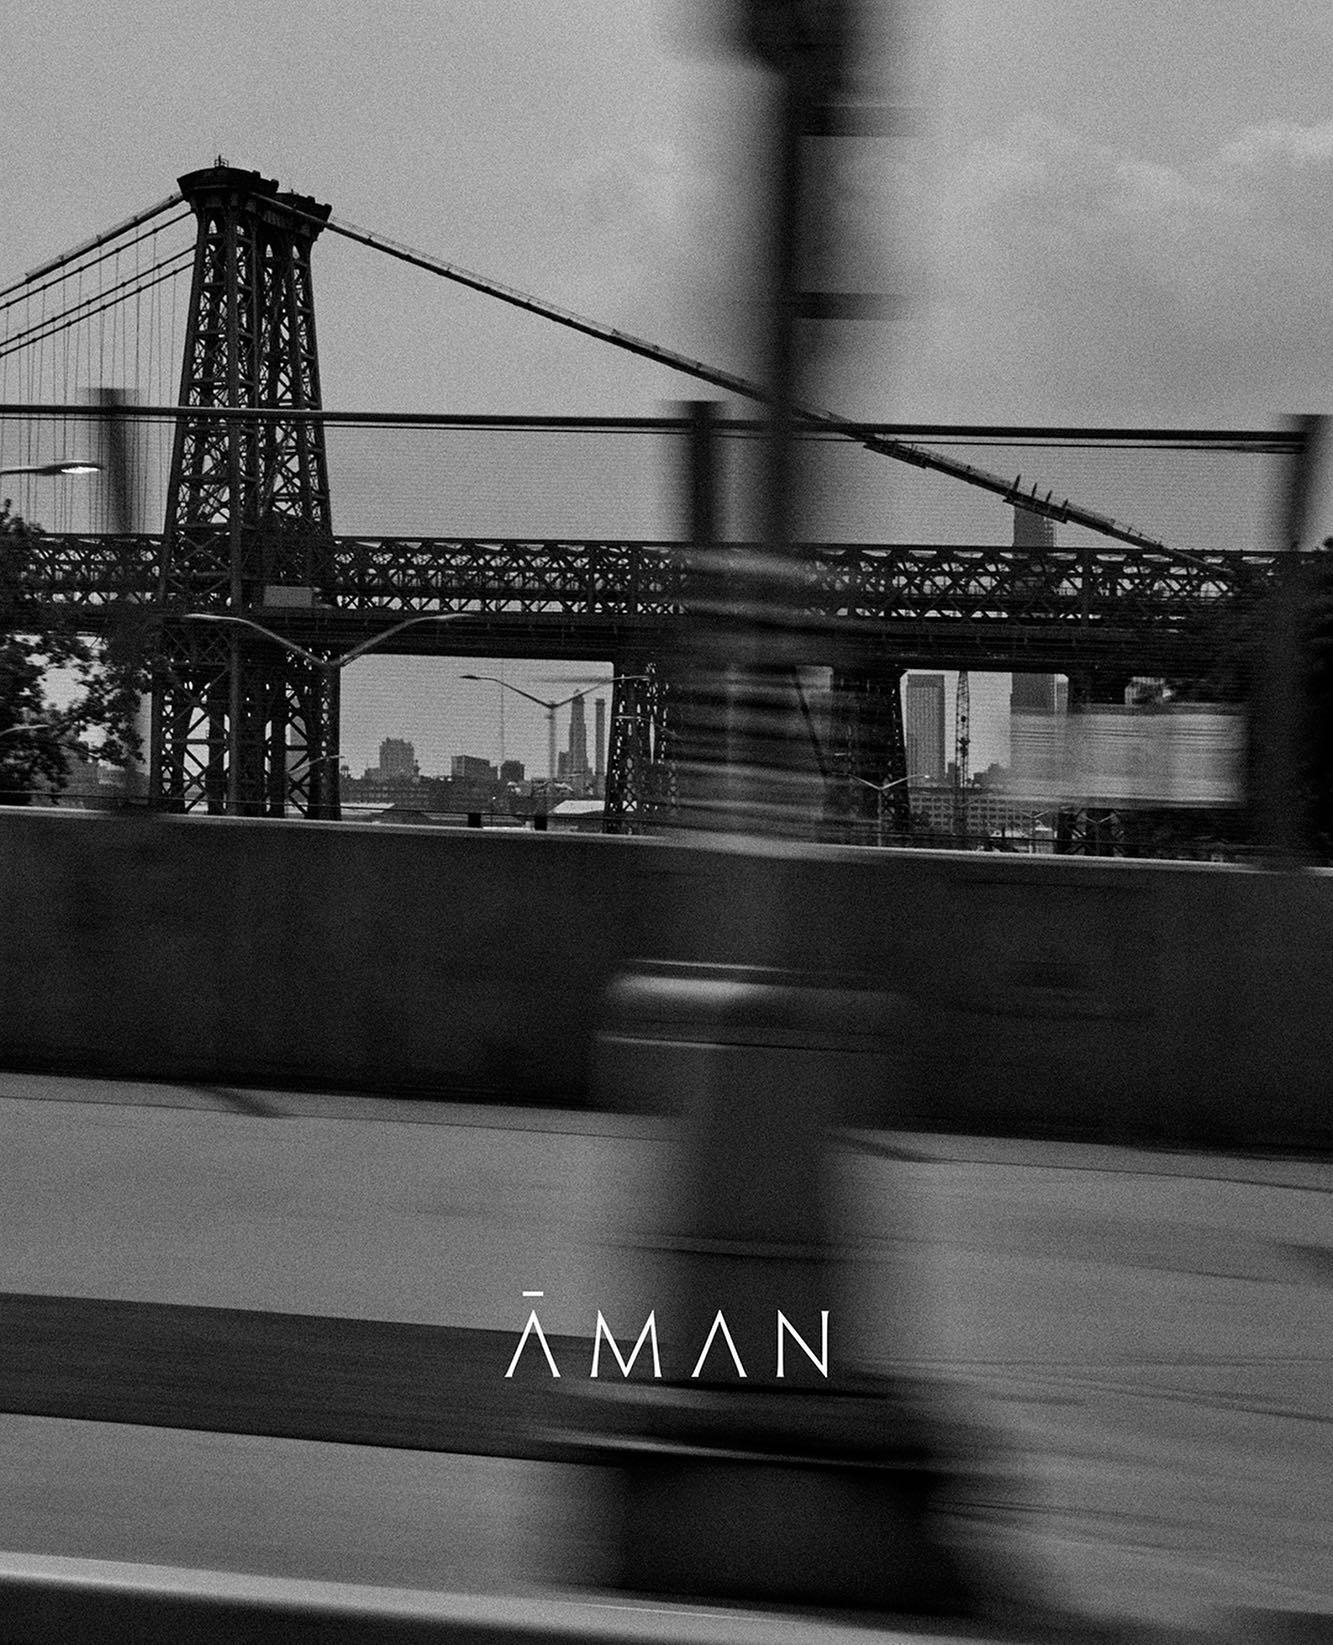 Aman New York - A view from the bridge